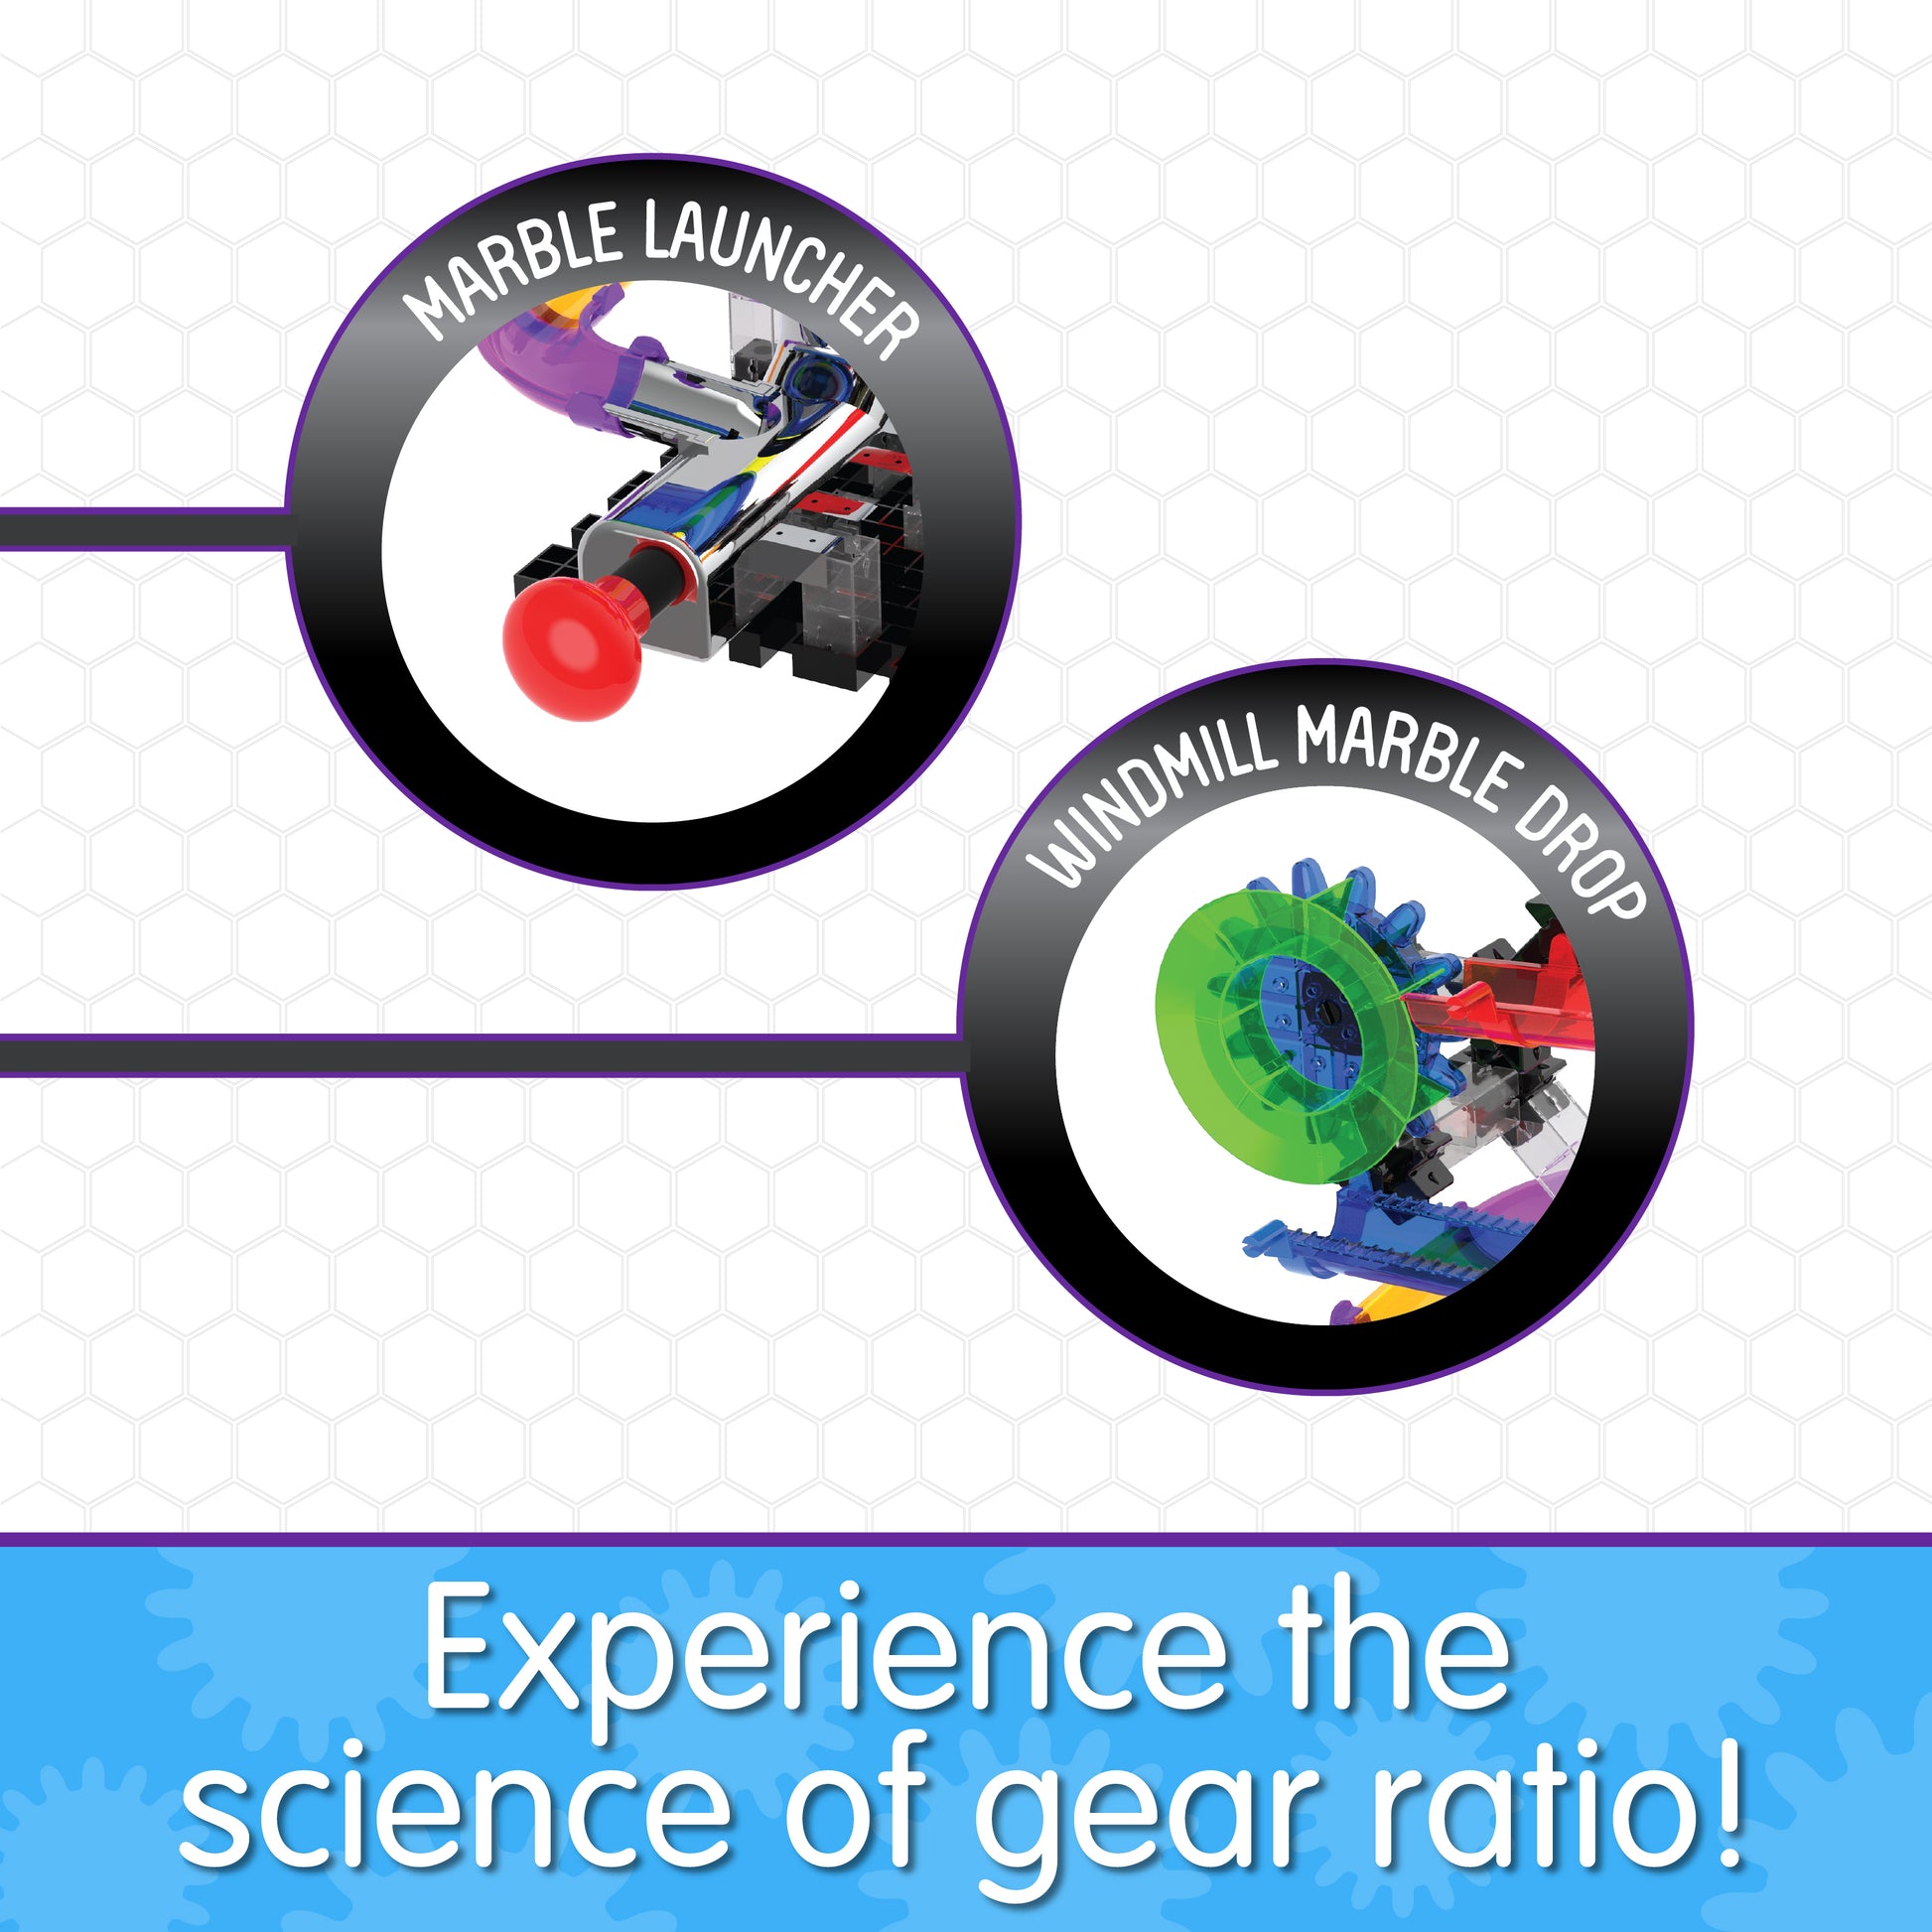 Infographic about HotShot's features that says, "Experience the science of gear ratio!"